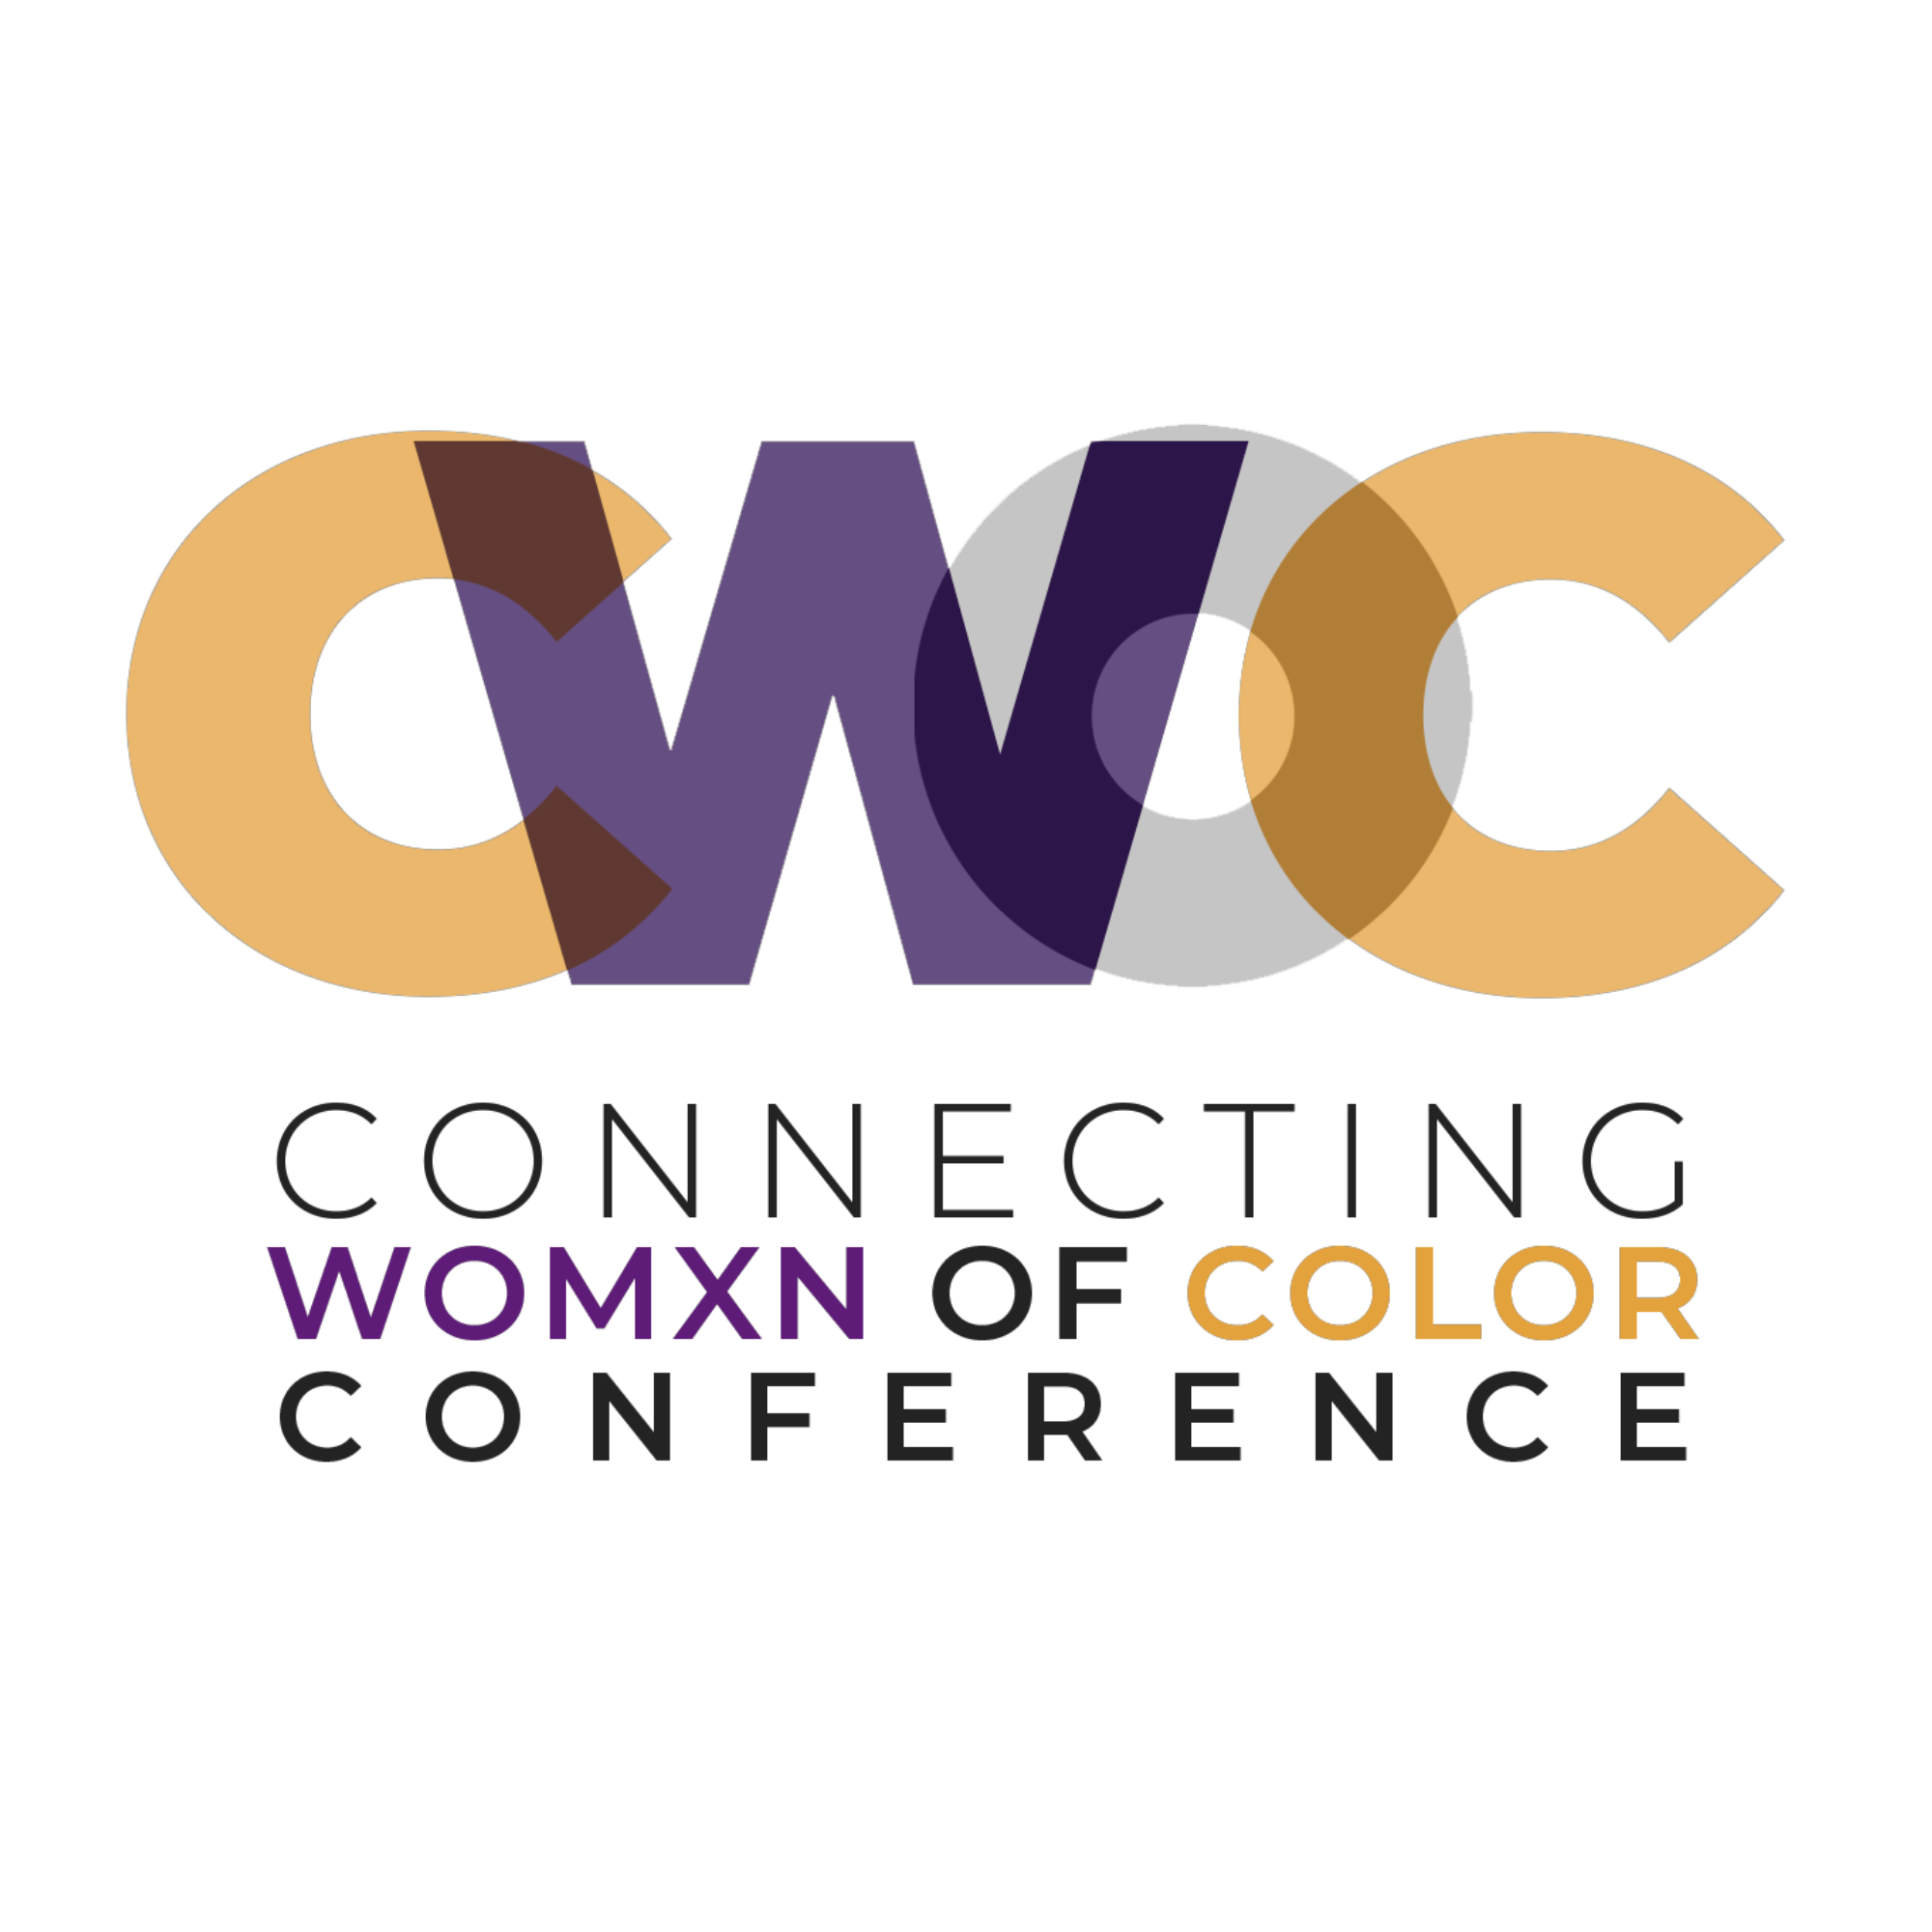 Connecting Womxn of Color Conference